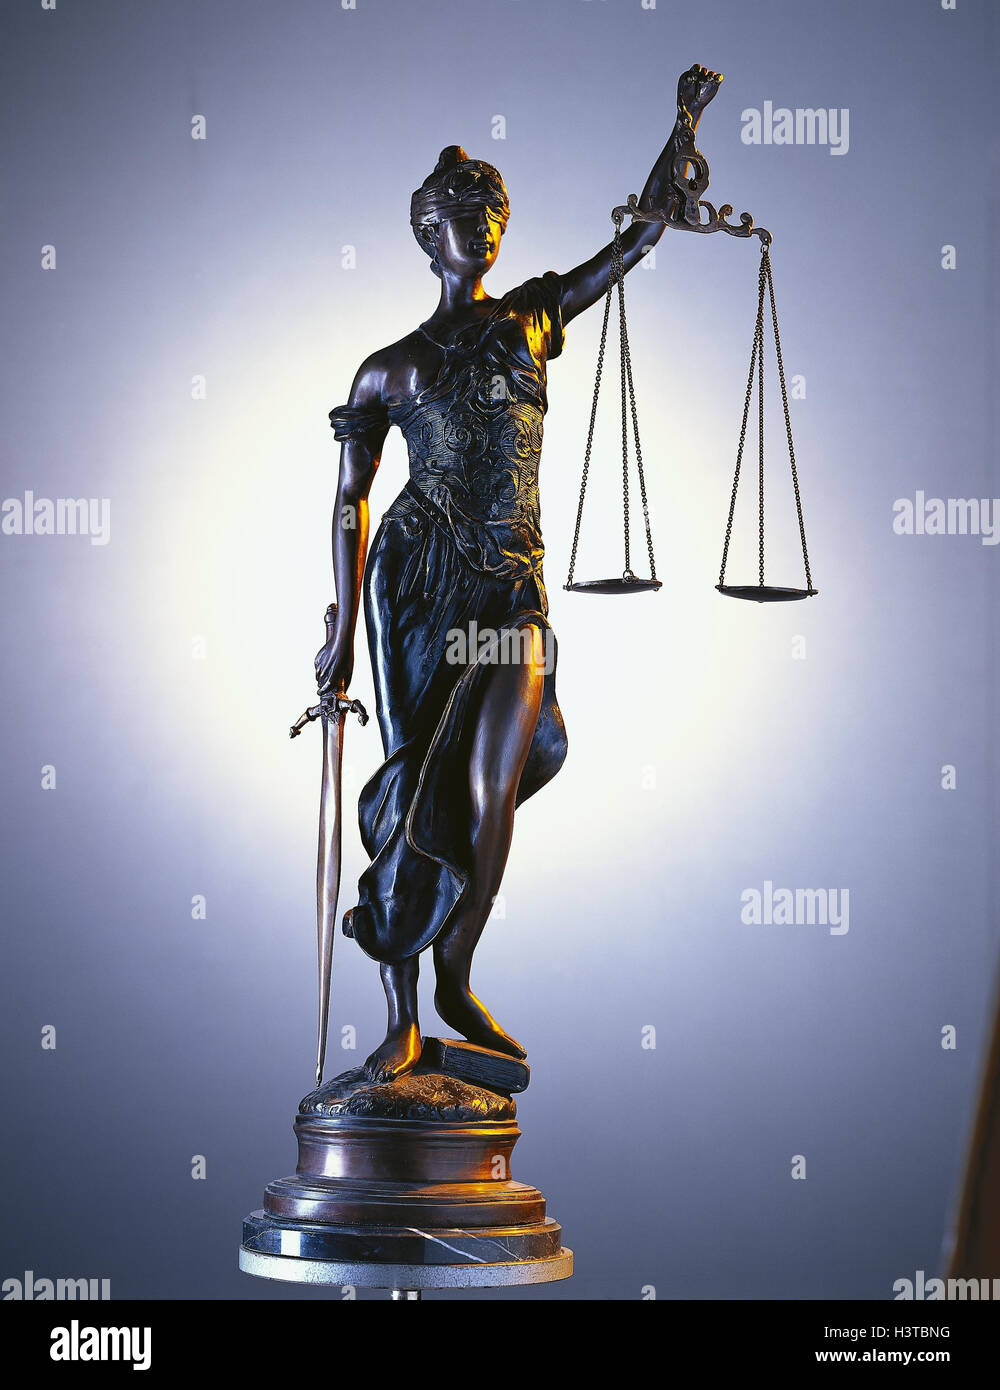 Statue, Justice, right, judicature, justice, goddess, ancient Roman, Iustitia, product photography, Still life Stock Photo